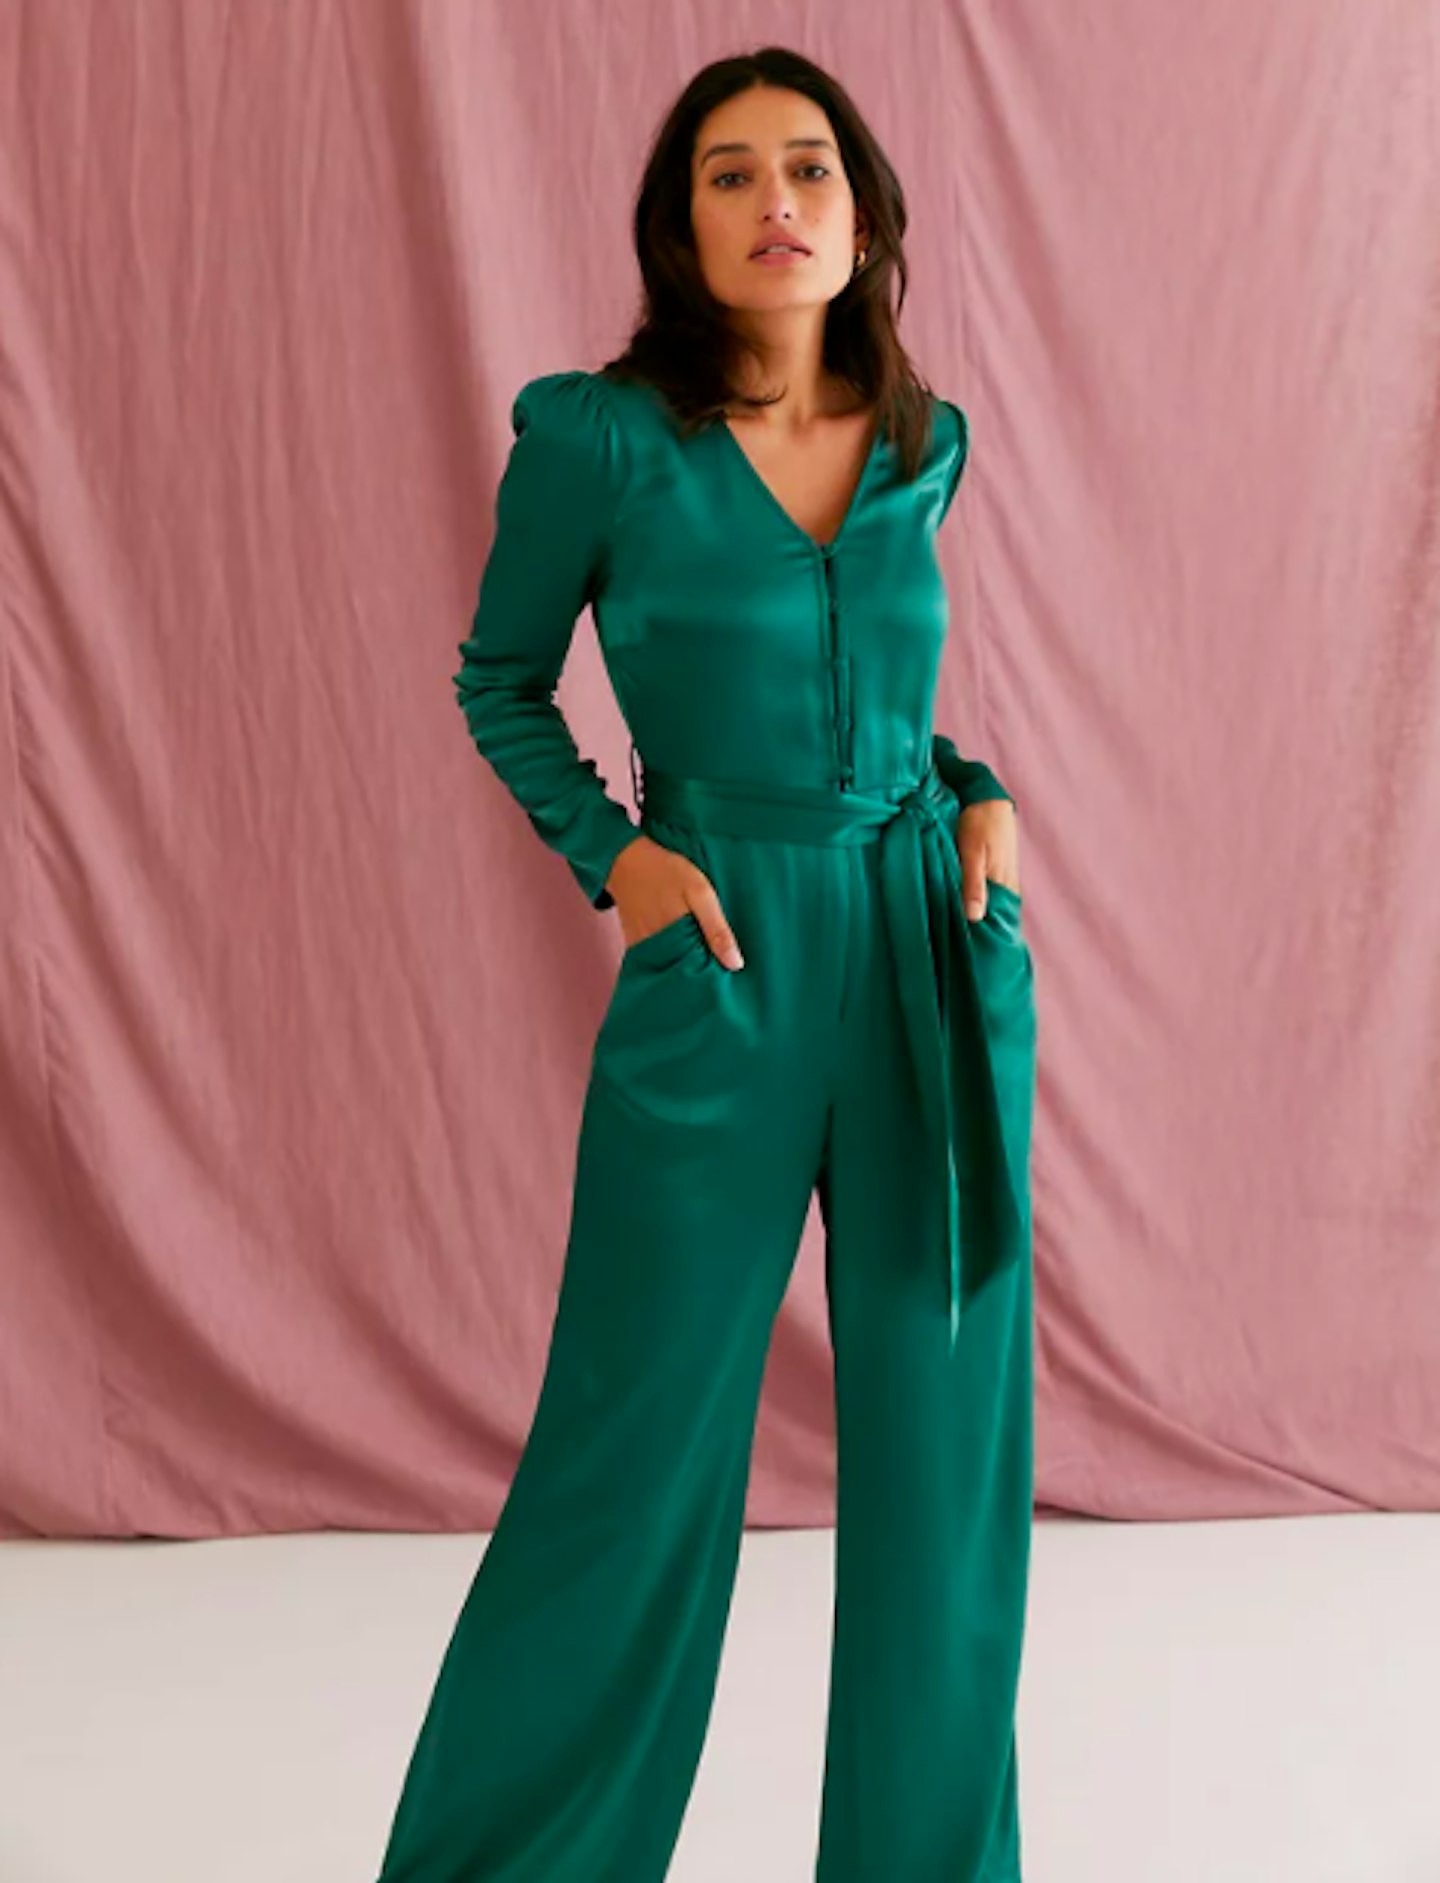 M&S x Ghost, Green Satin Jumpsuit, £79